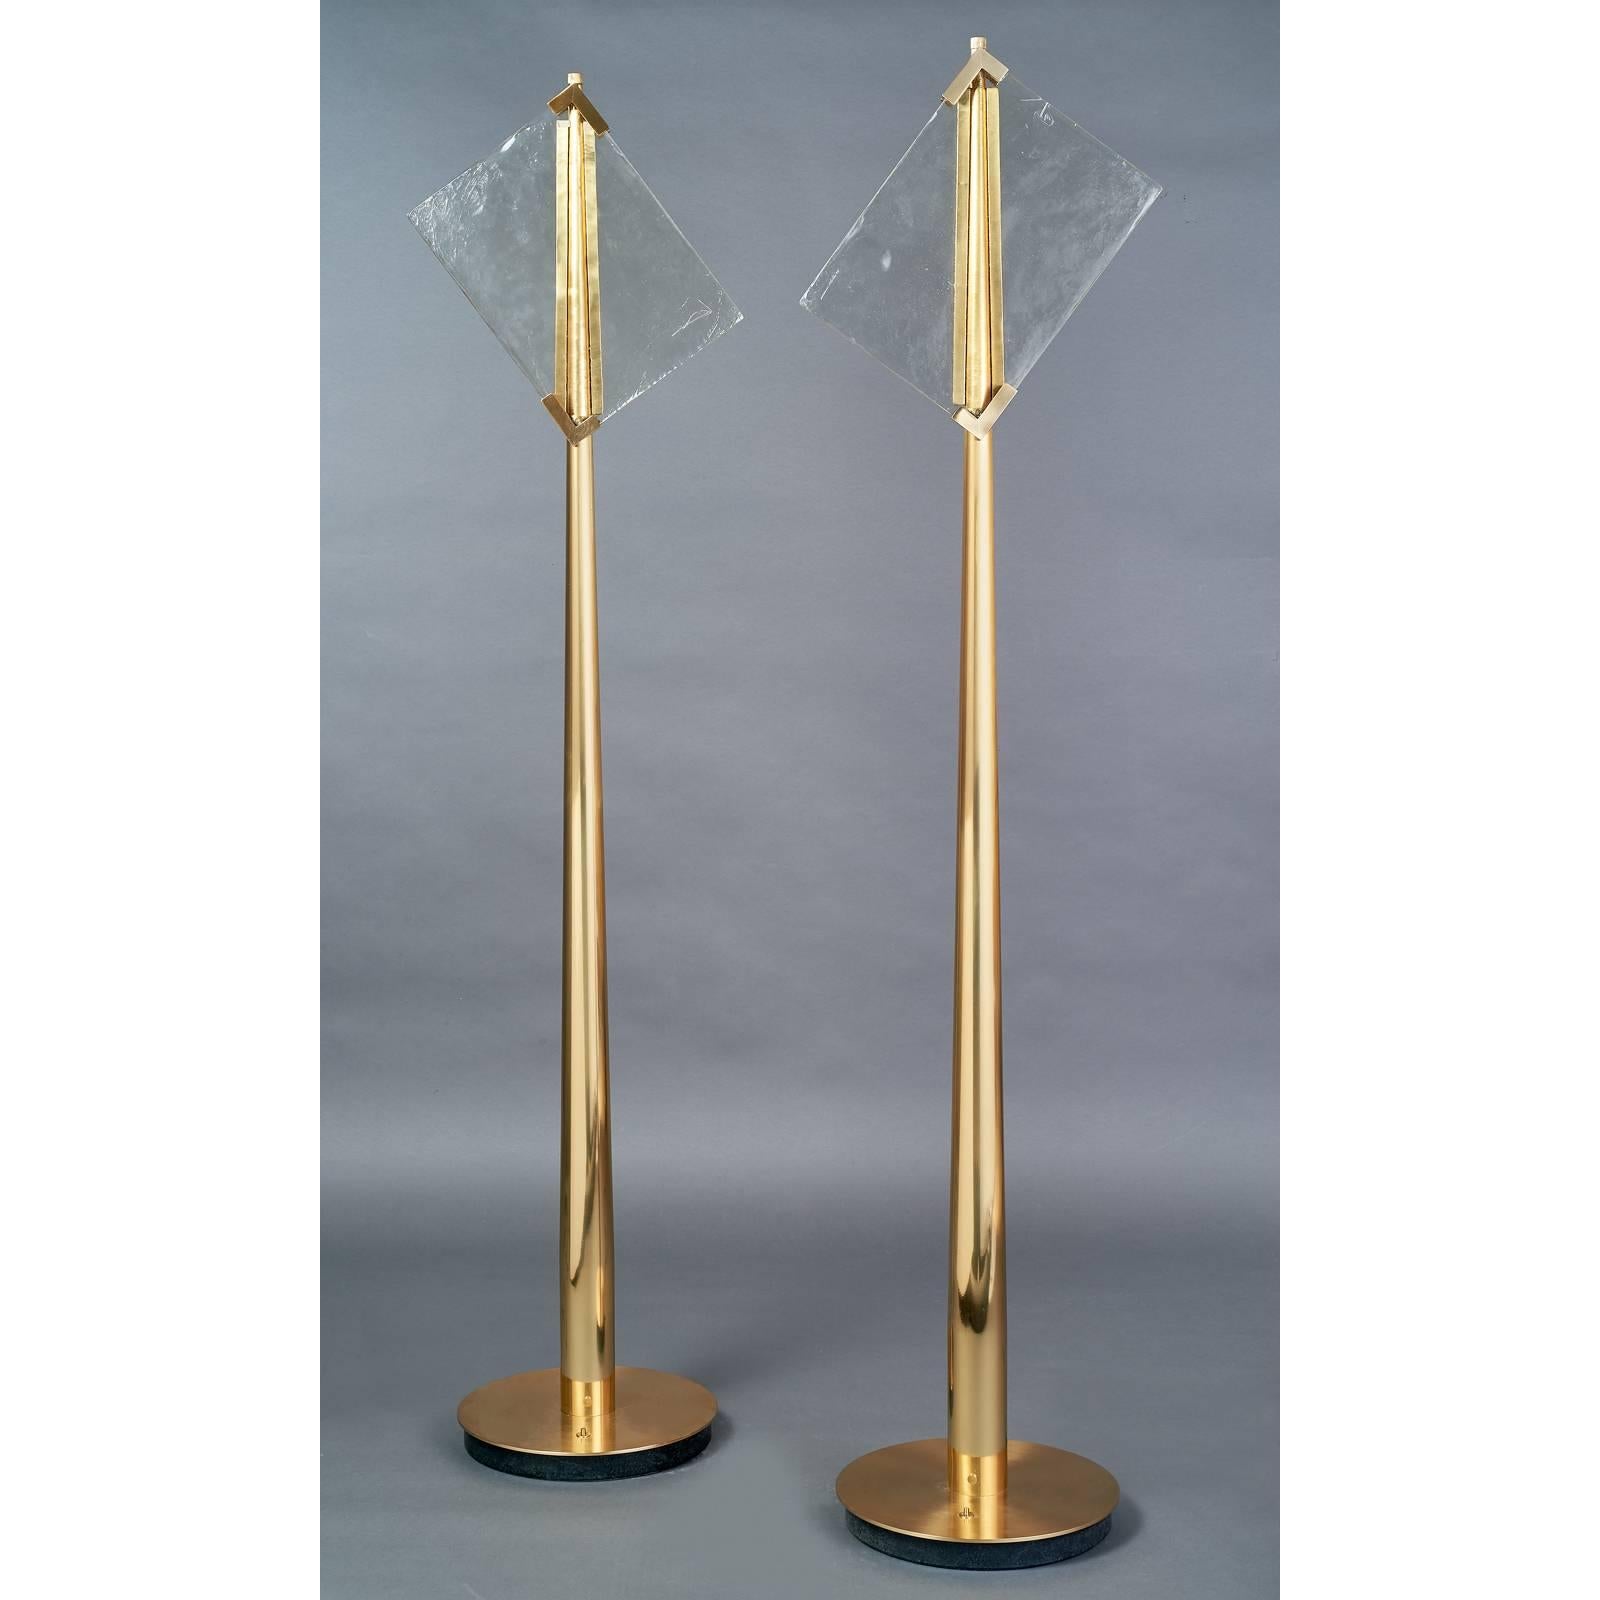 Roberto Rida ( b. 1943 )
A majestic and unique pair of standing lamps by Roberto Rida, each lamp featuring a pair of vintage Venini glass panels backlit with LED,
raised on two 6.5 foot brass tapering columns.
The  clear glass panels are signed